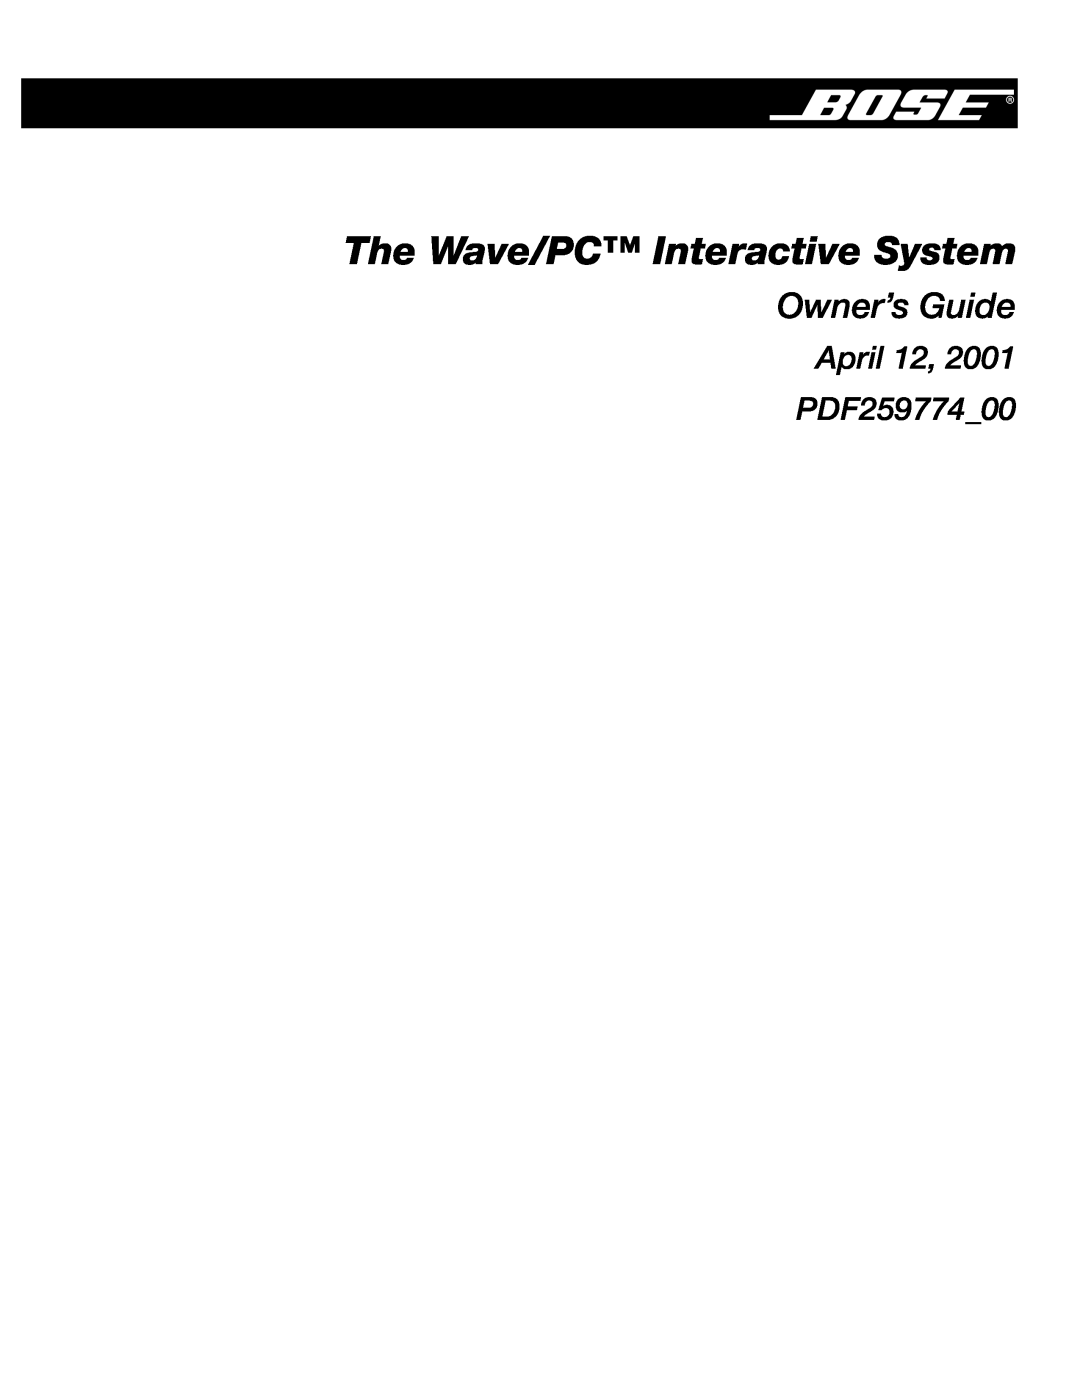 Bose PDF259774_00 manual The Wave/PC Interactive System, Owner’s Guide 